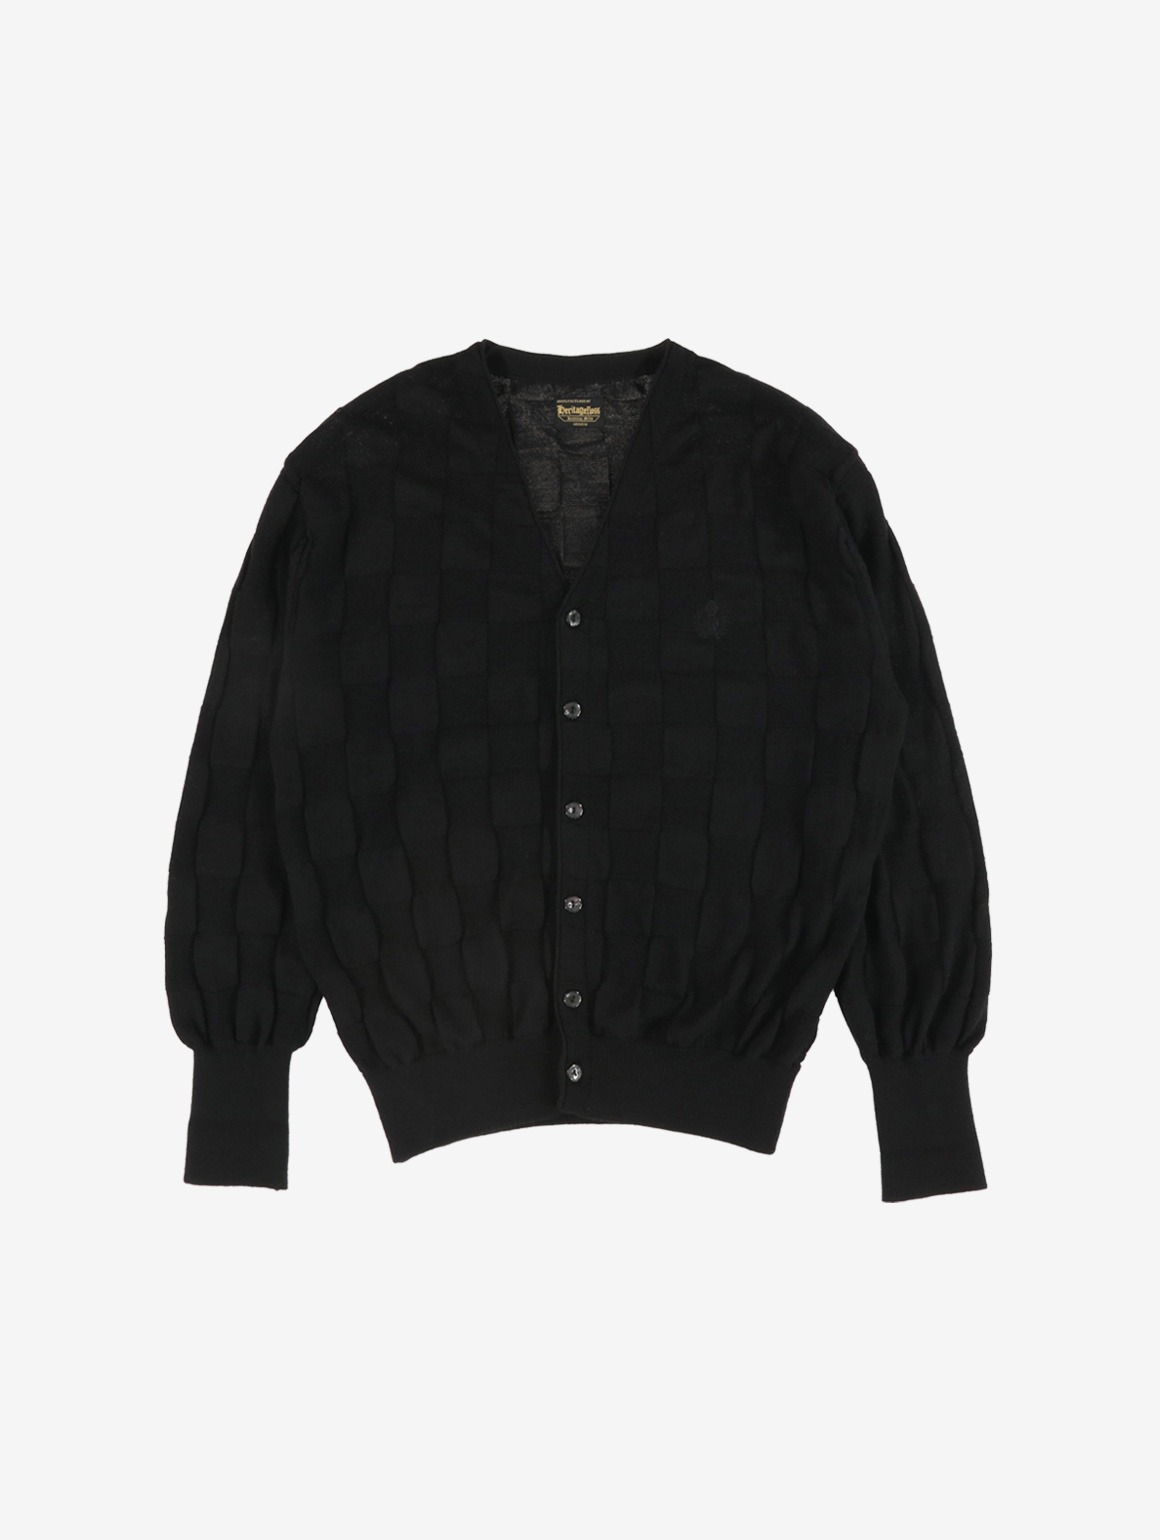 HFC CREST CHECKED CARDIGAN